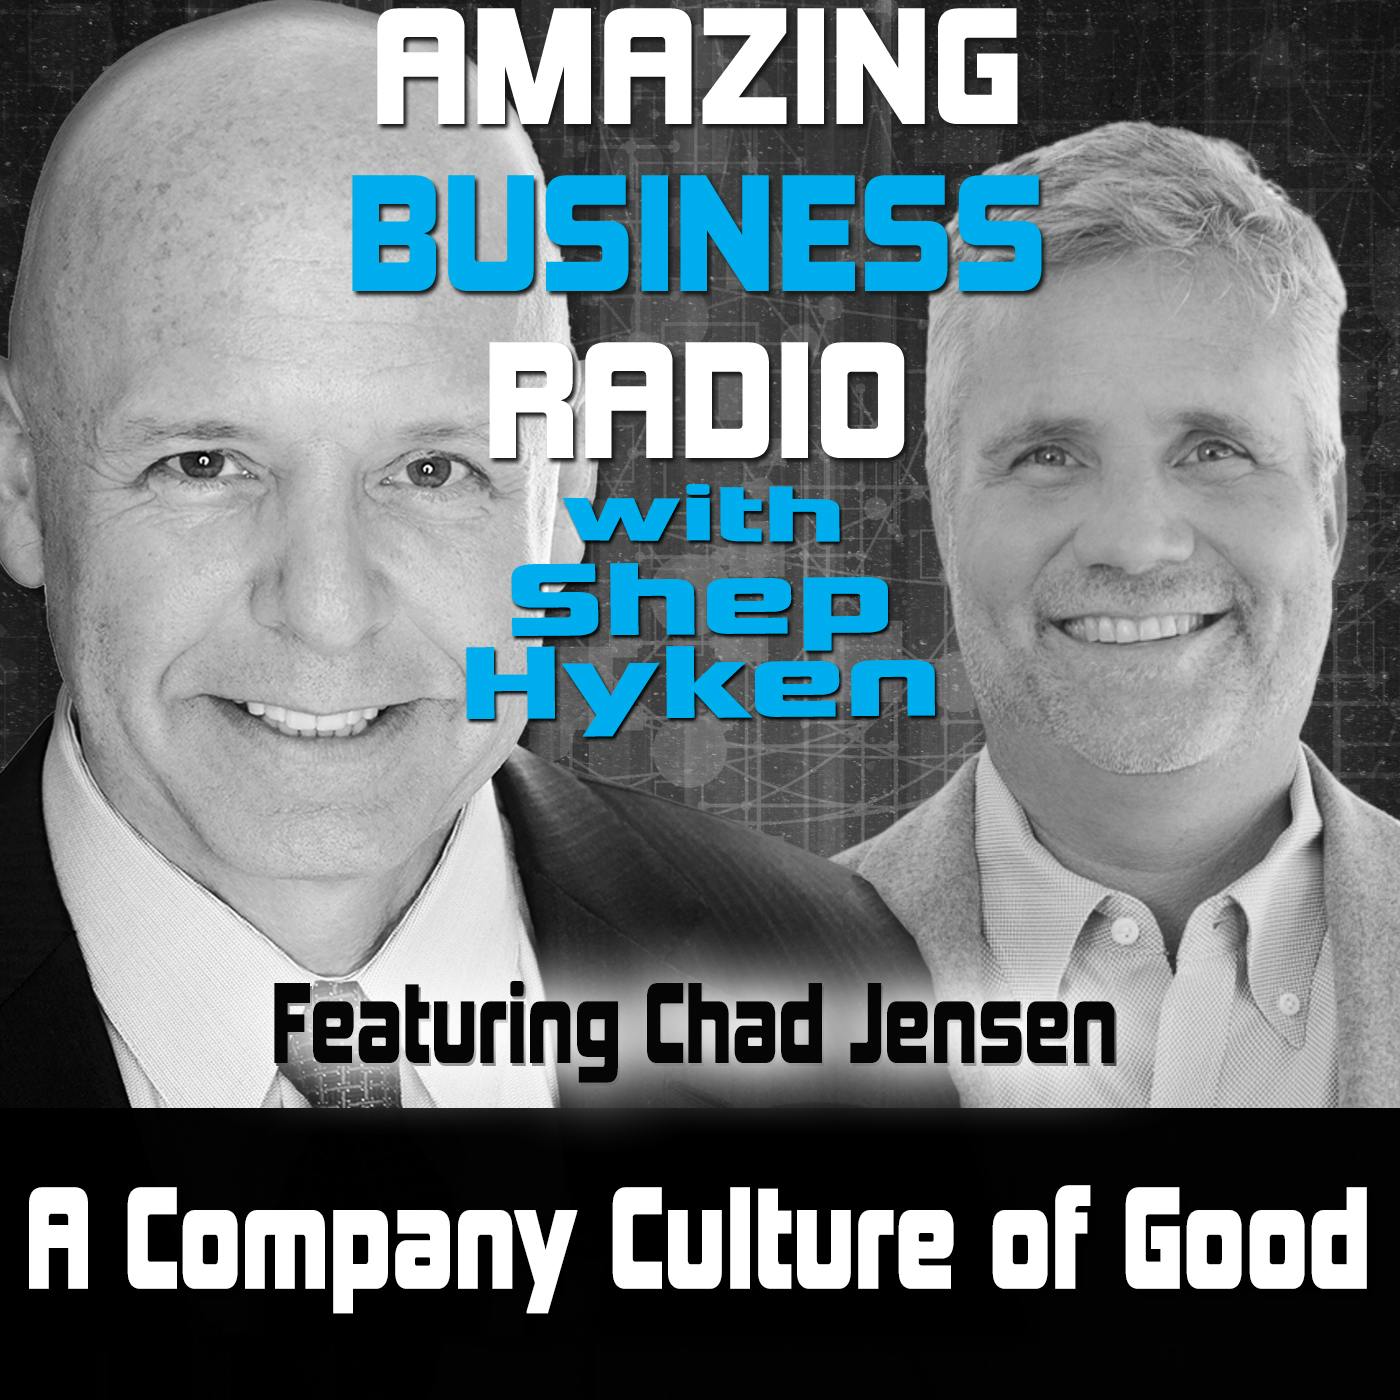 A Company Culture of Good Featuring Chad Jensen